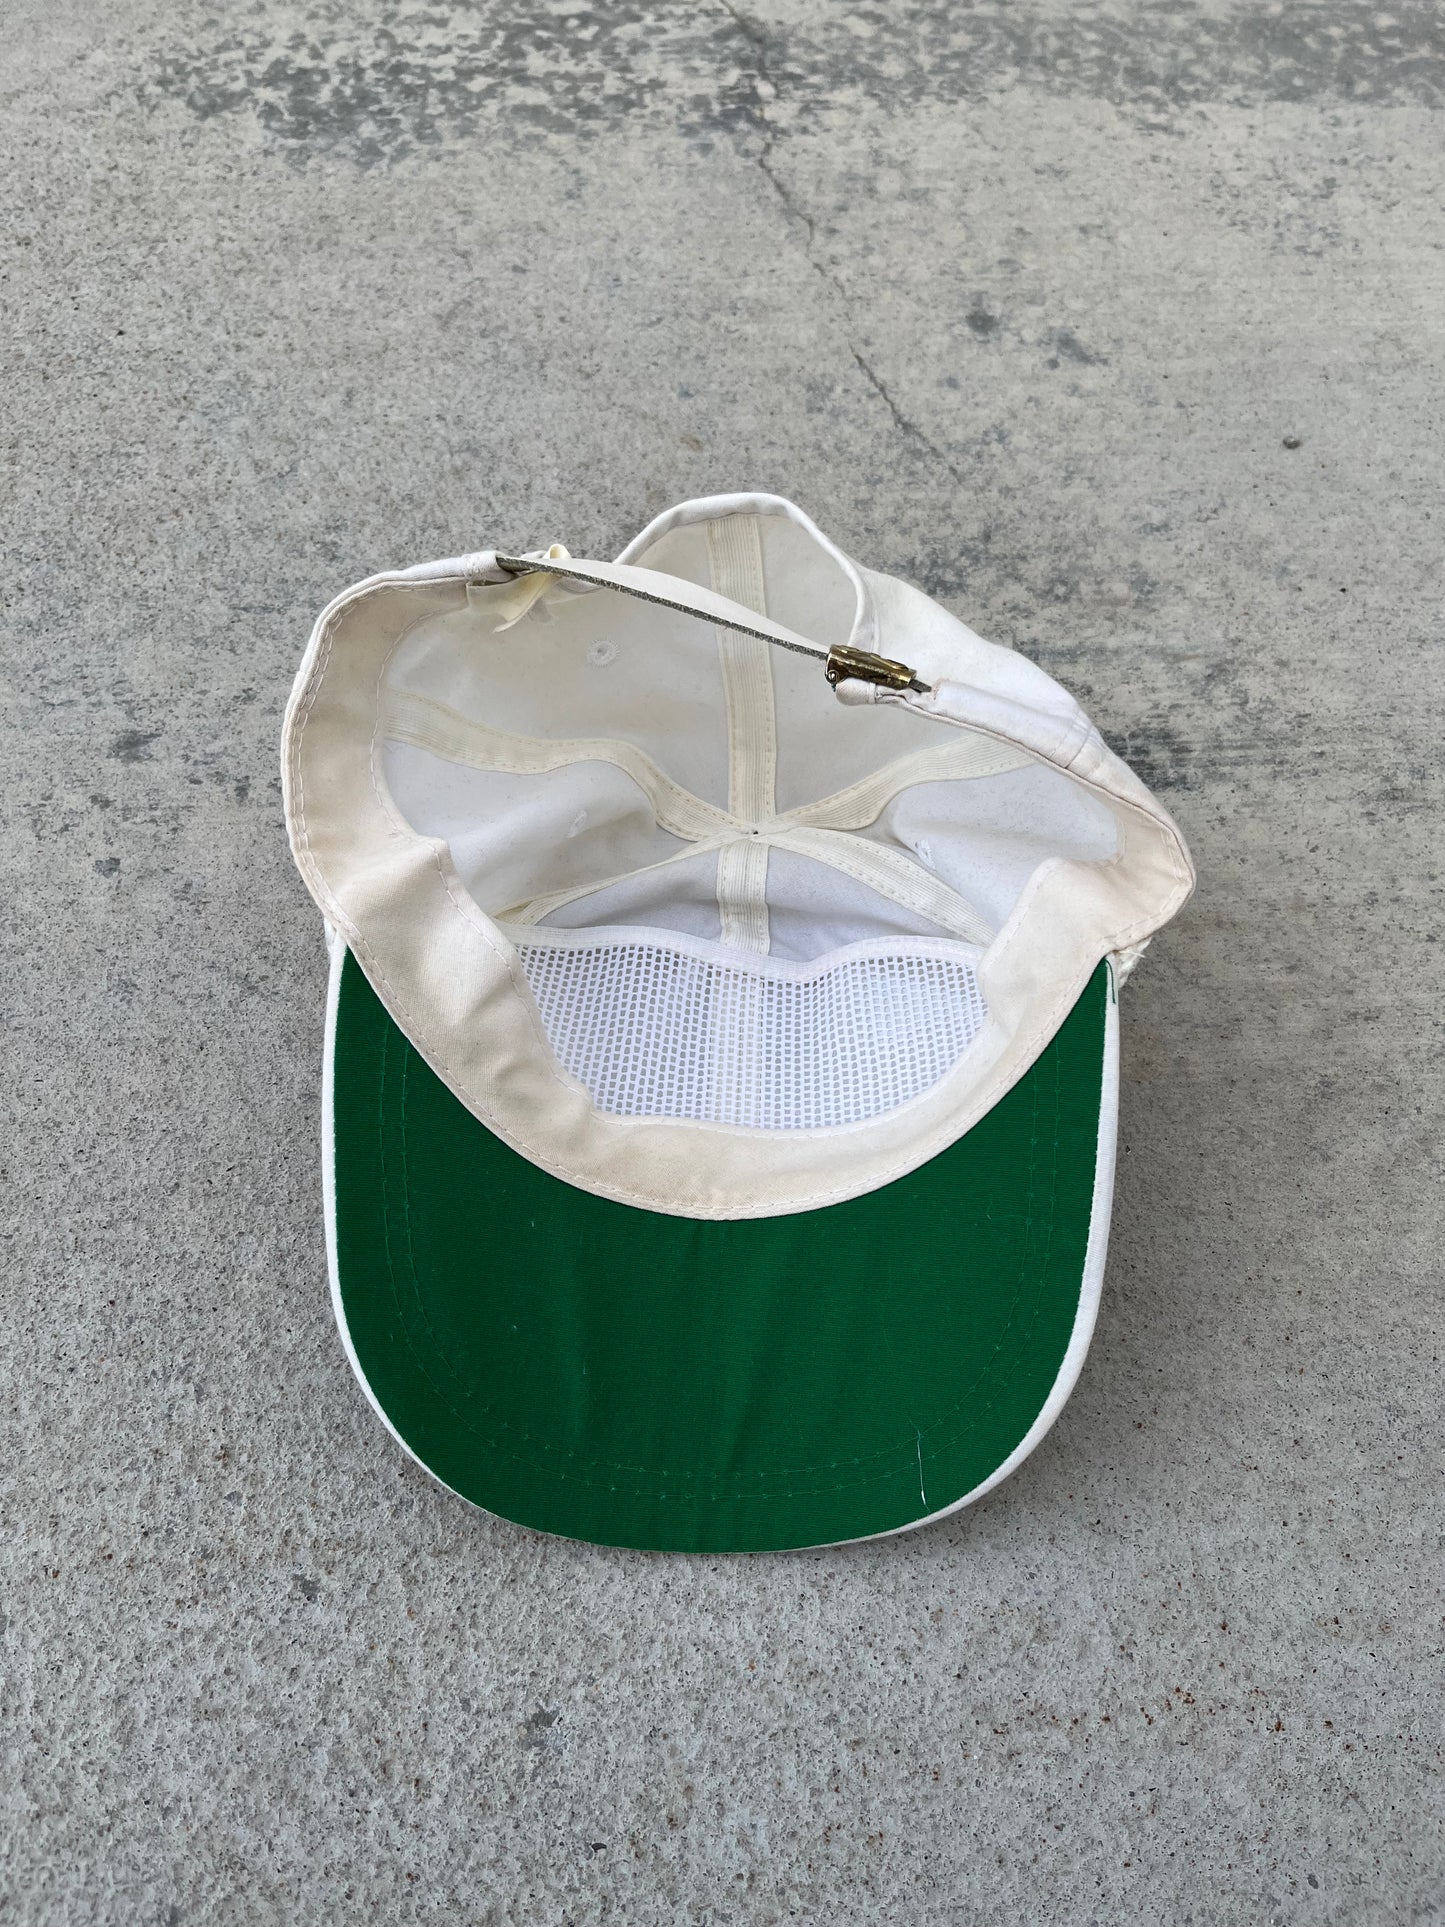 Sherwin Williams "Cover The Earth" Hat